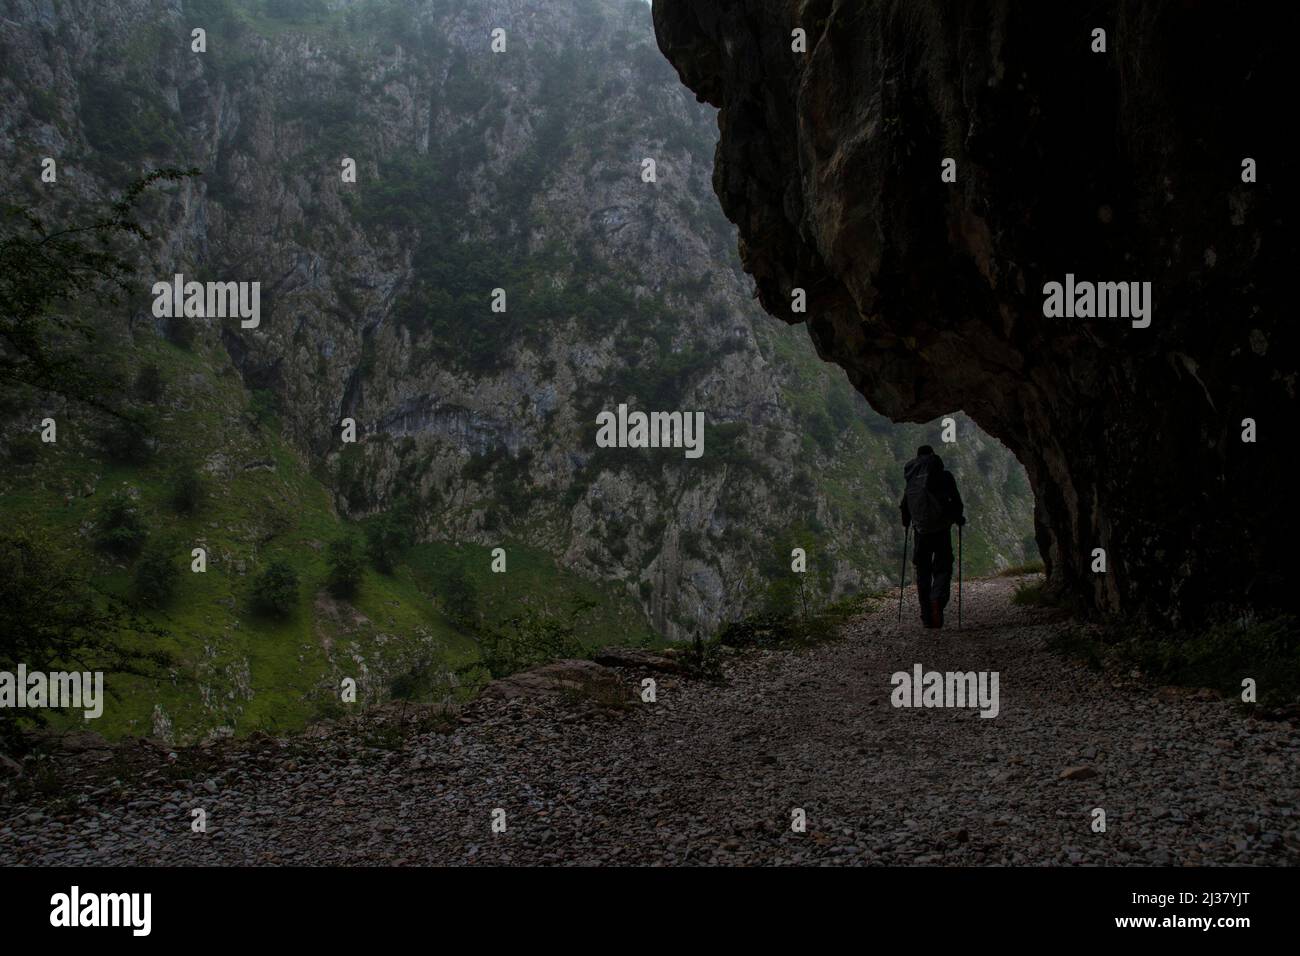 Hiker walks along the trail in the cliffs near the edge in a foggy rainy day Stock Photo